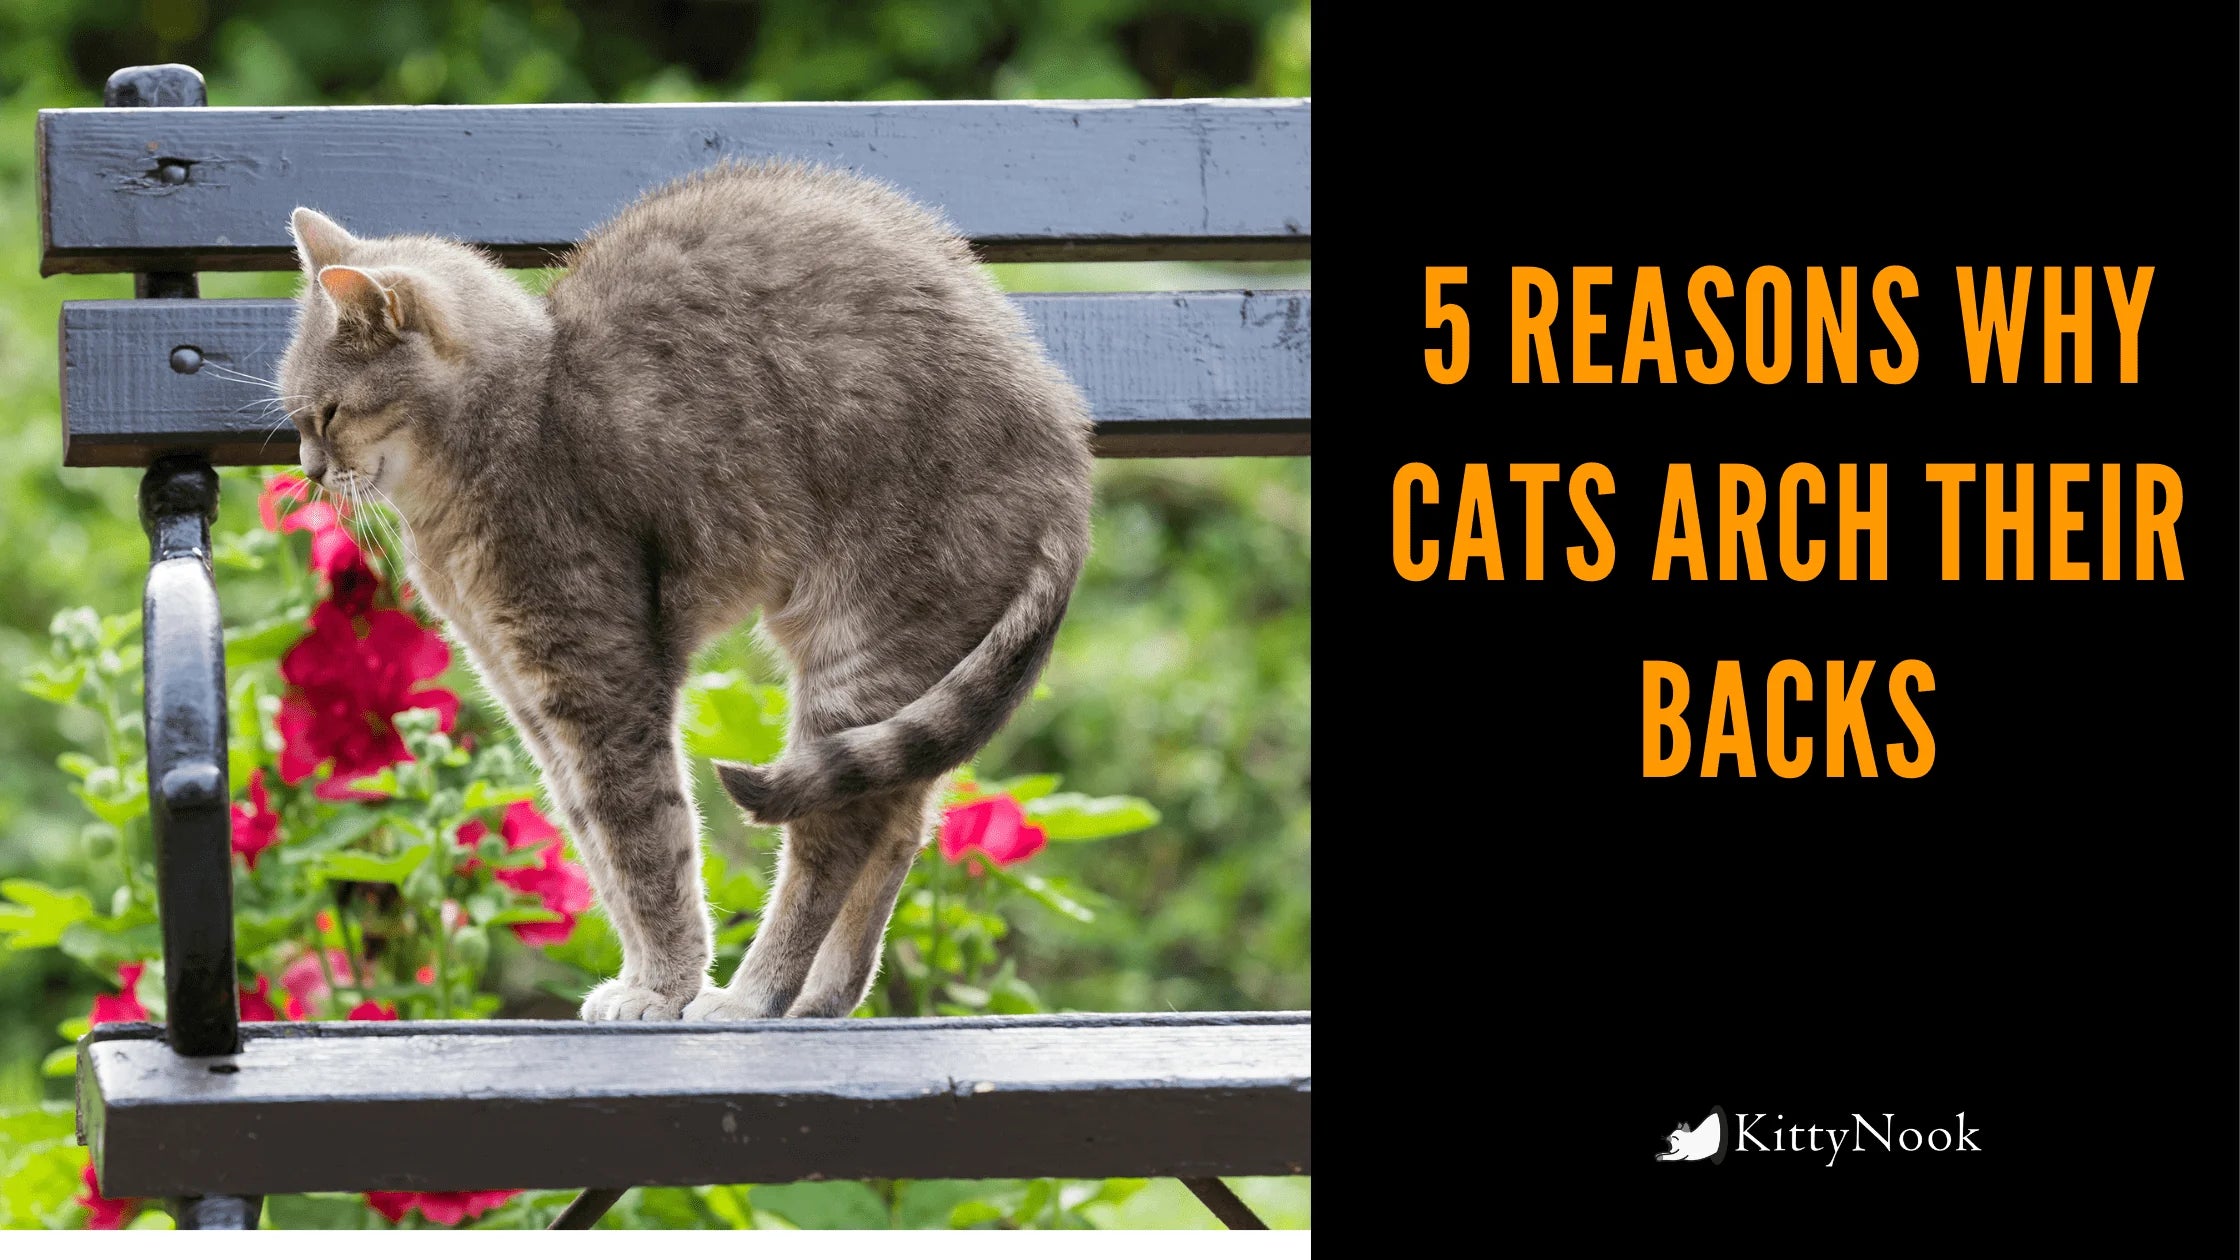 5 Reasons Why Cats Arch Their Backs - KittyNook Cat Company